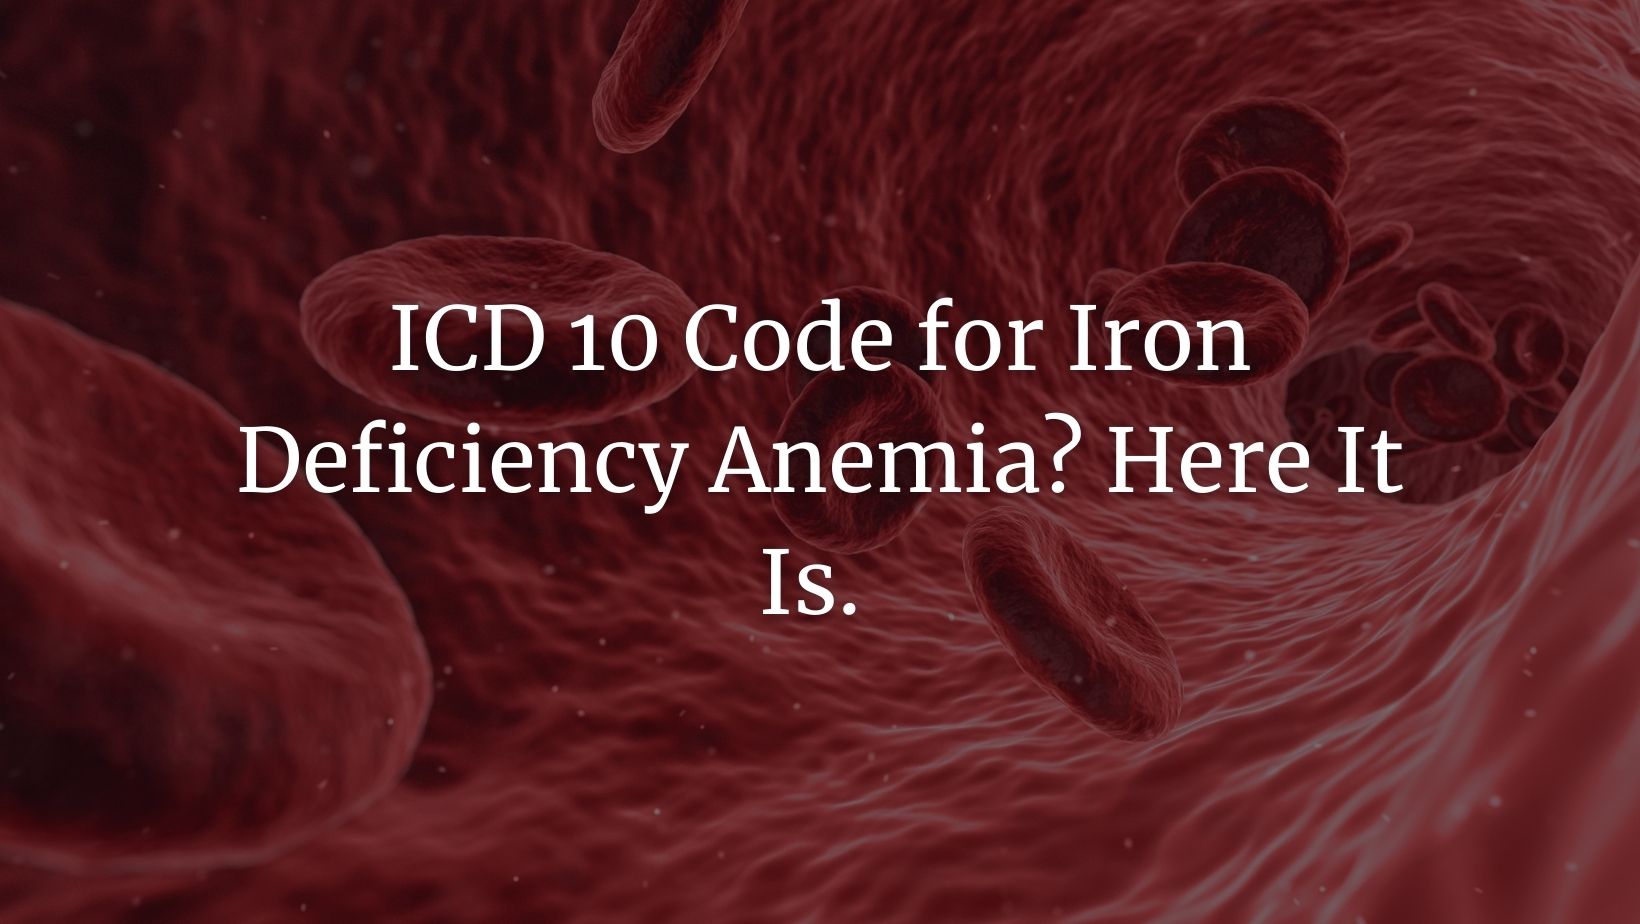 ICD 10 code for iron deficiency anemia featured image